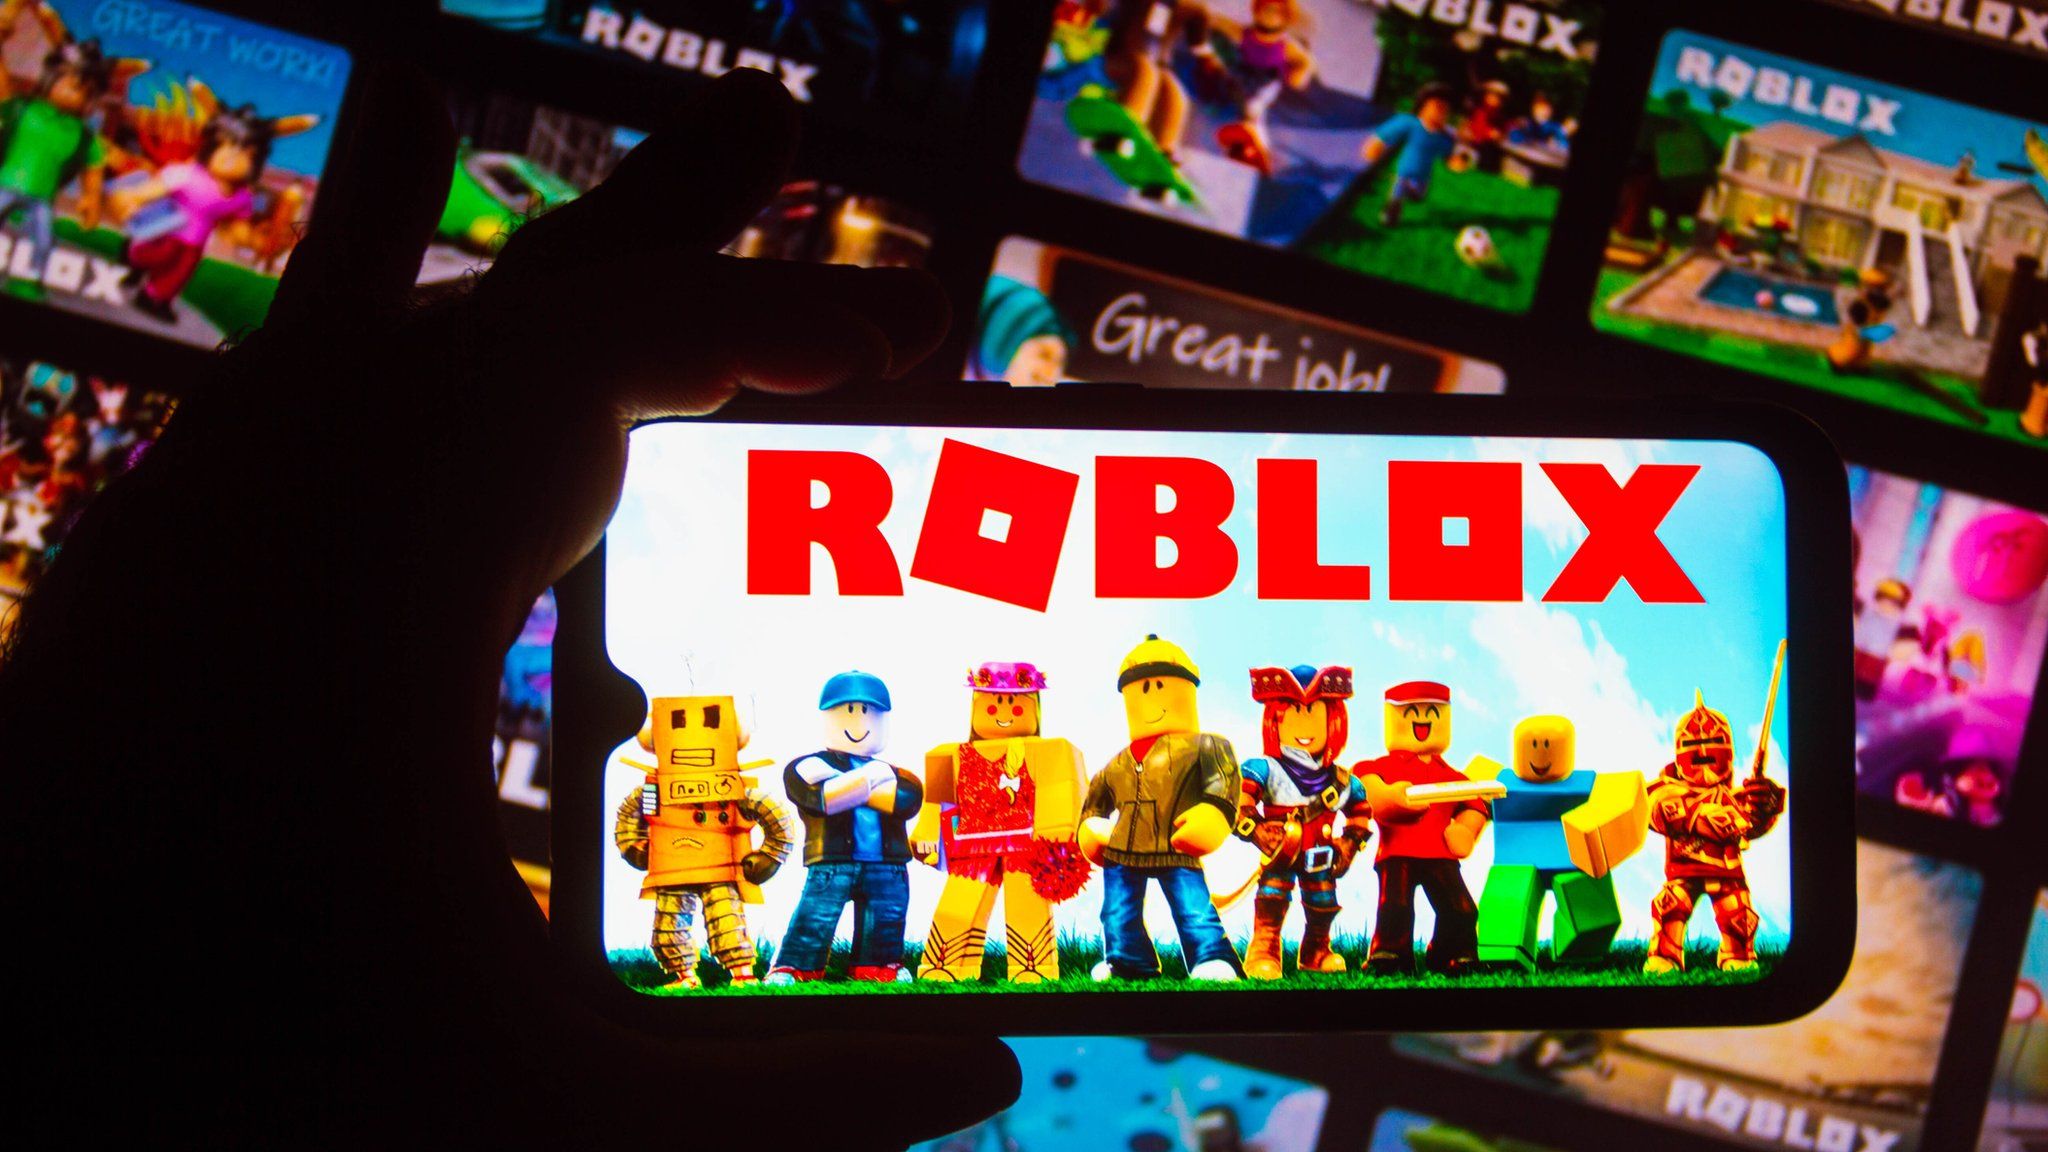 Roblox: the children's game platform with 'Nazi sex parties